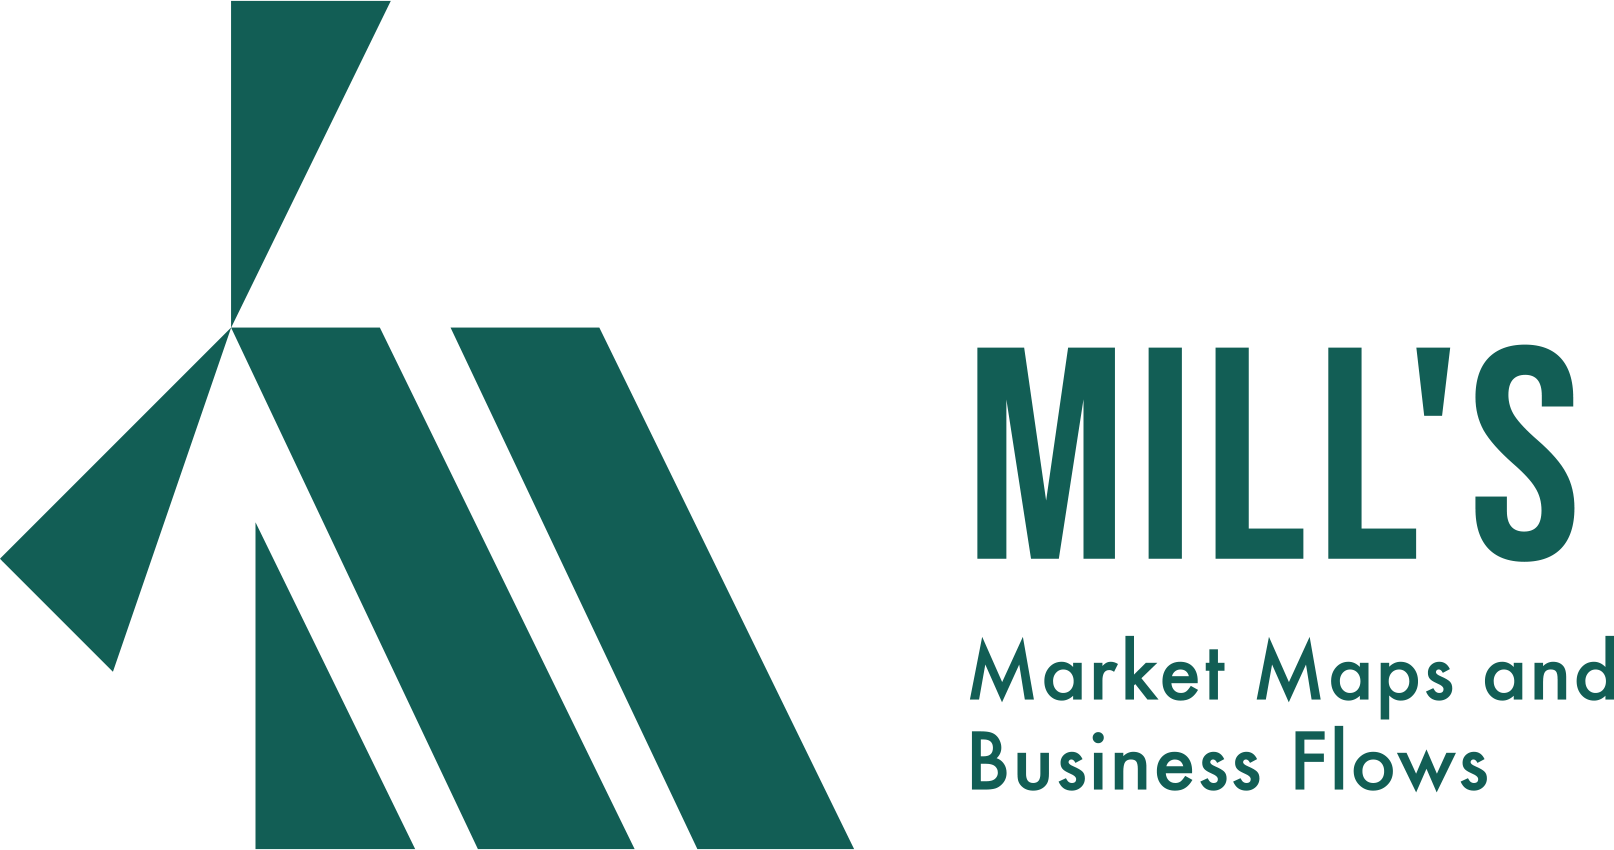 MILL'S - Market Maps and Business Flows